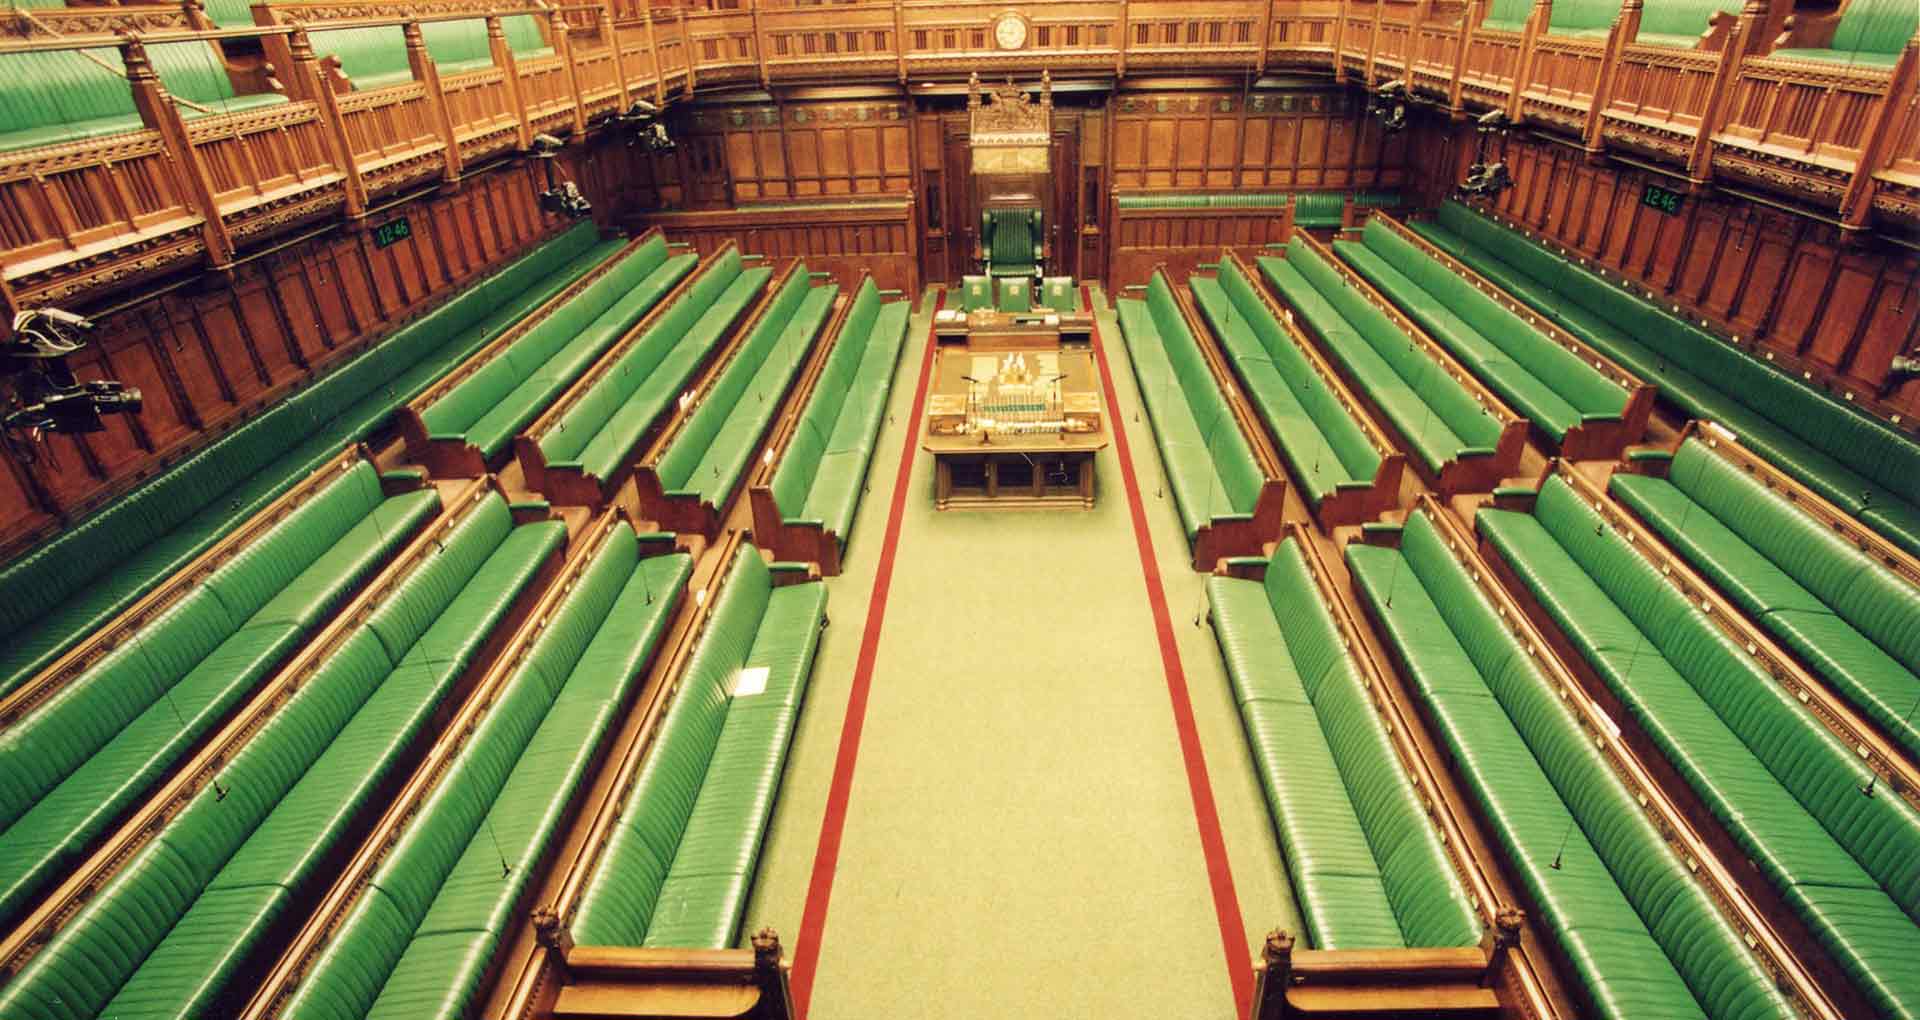 Photo of the inside of the UK House of Commons showing 8 rows of empty green leather bench seats and dark wood panelling on the walls